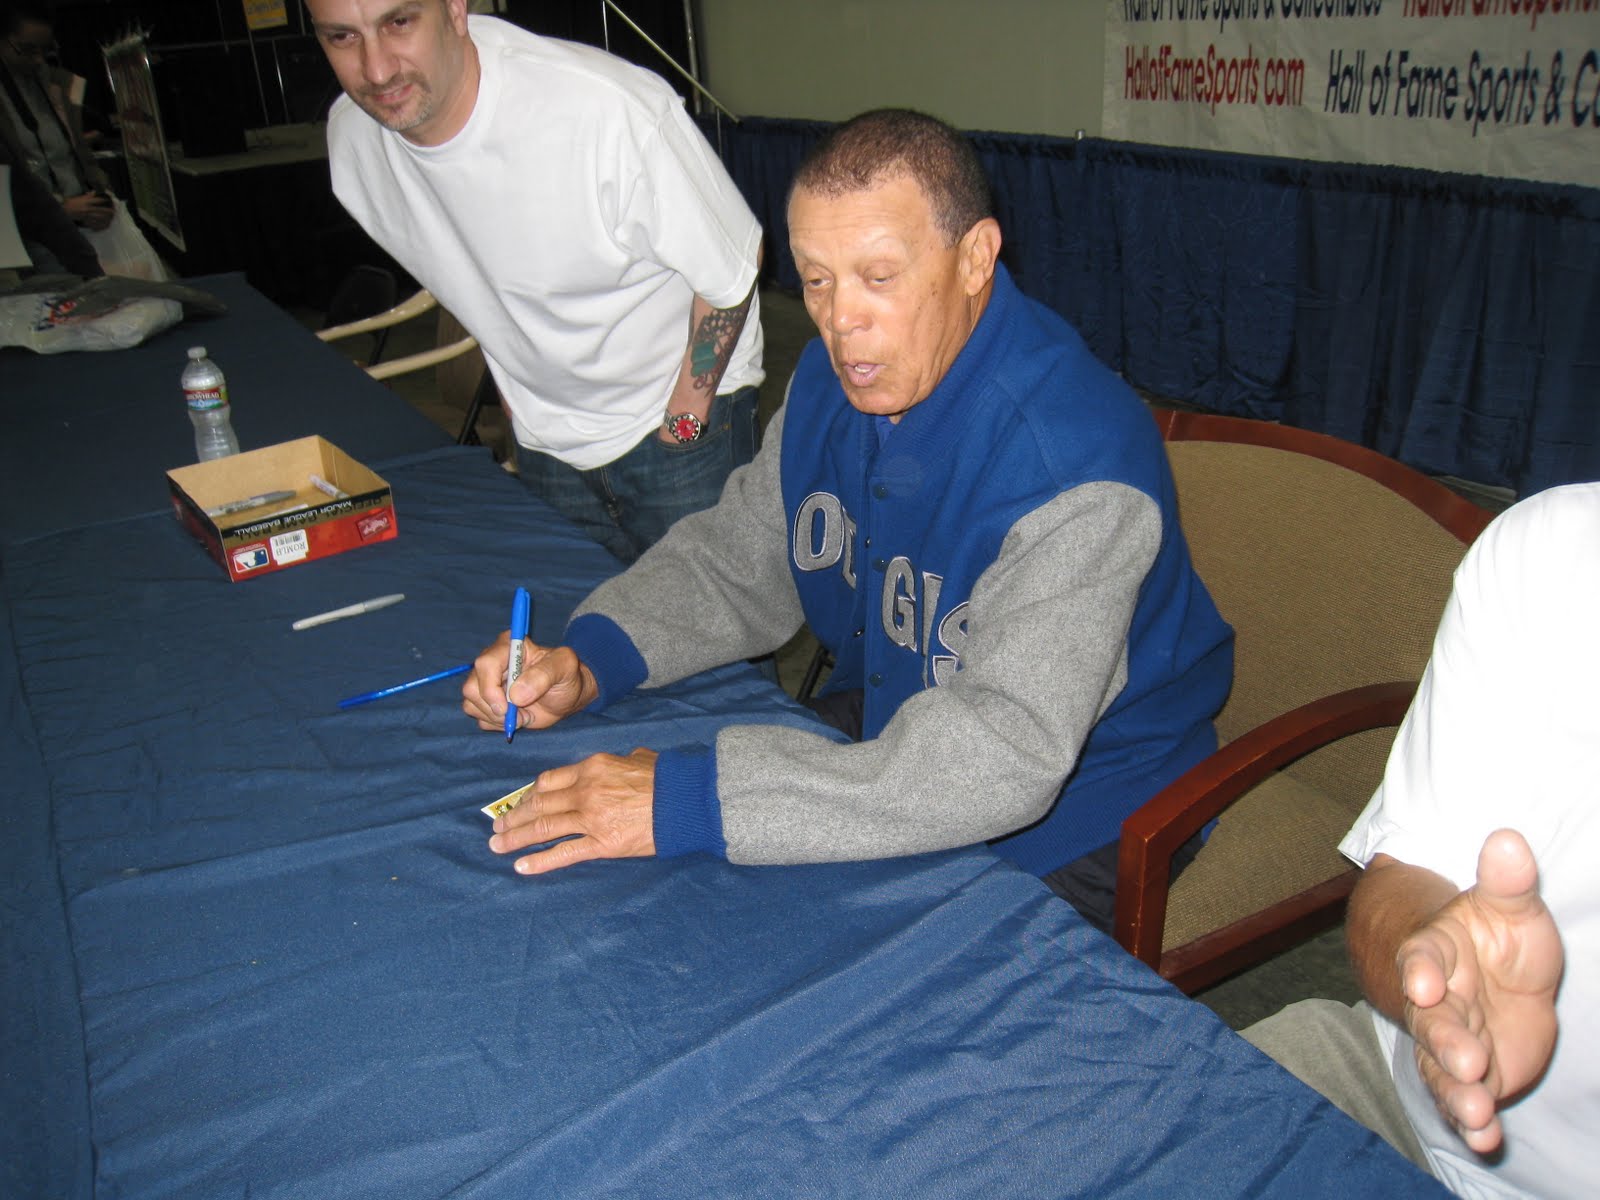 My Autograph Signings: Maury Wills Autograph Signing & Evander Holyfield Photo Op